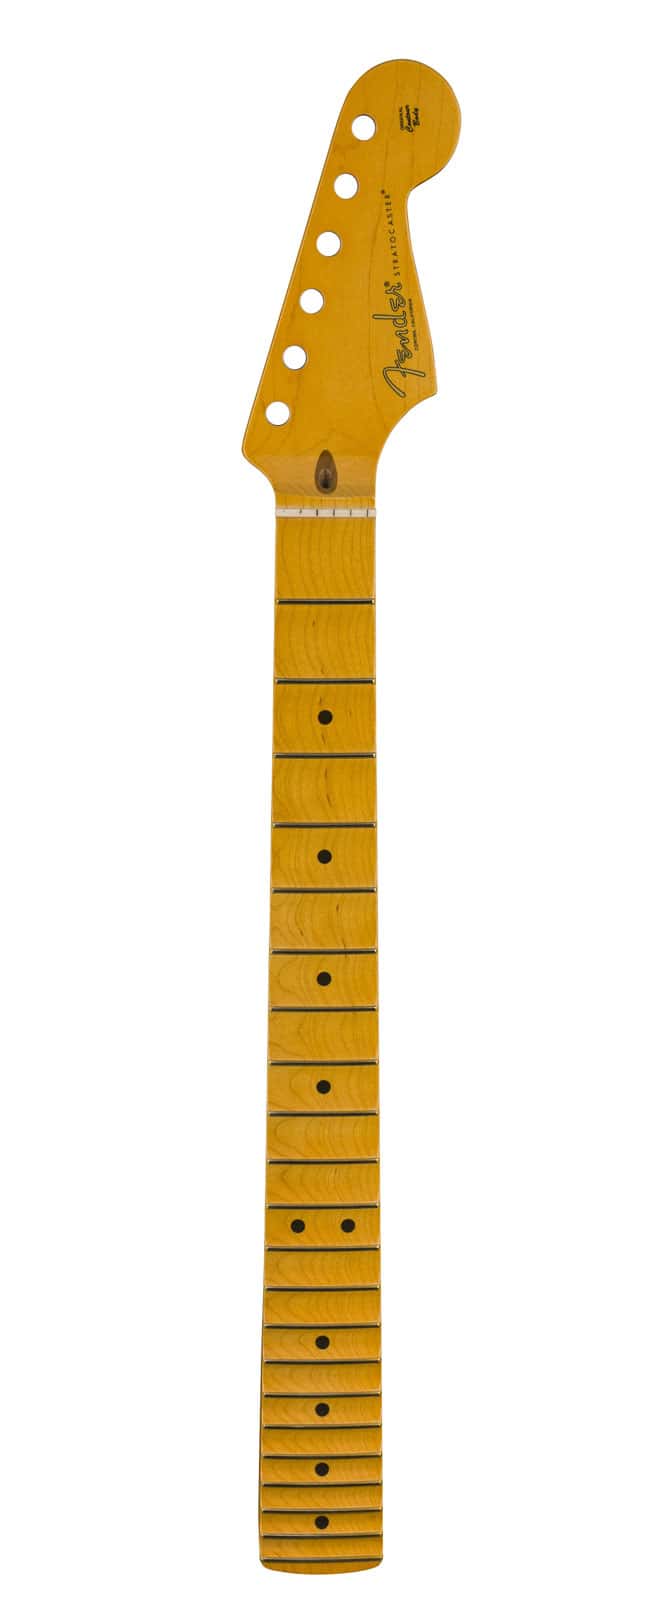 FENDER AMERICAN PROFESSIONAL II SCALLOPED STRATOCASTER NECK 22 NARROW TALL FRETS 9.5